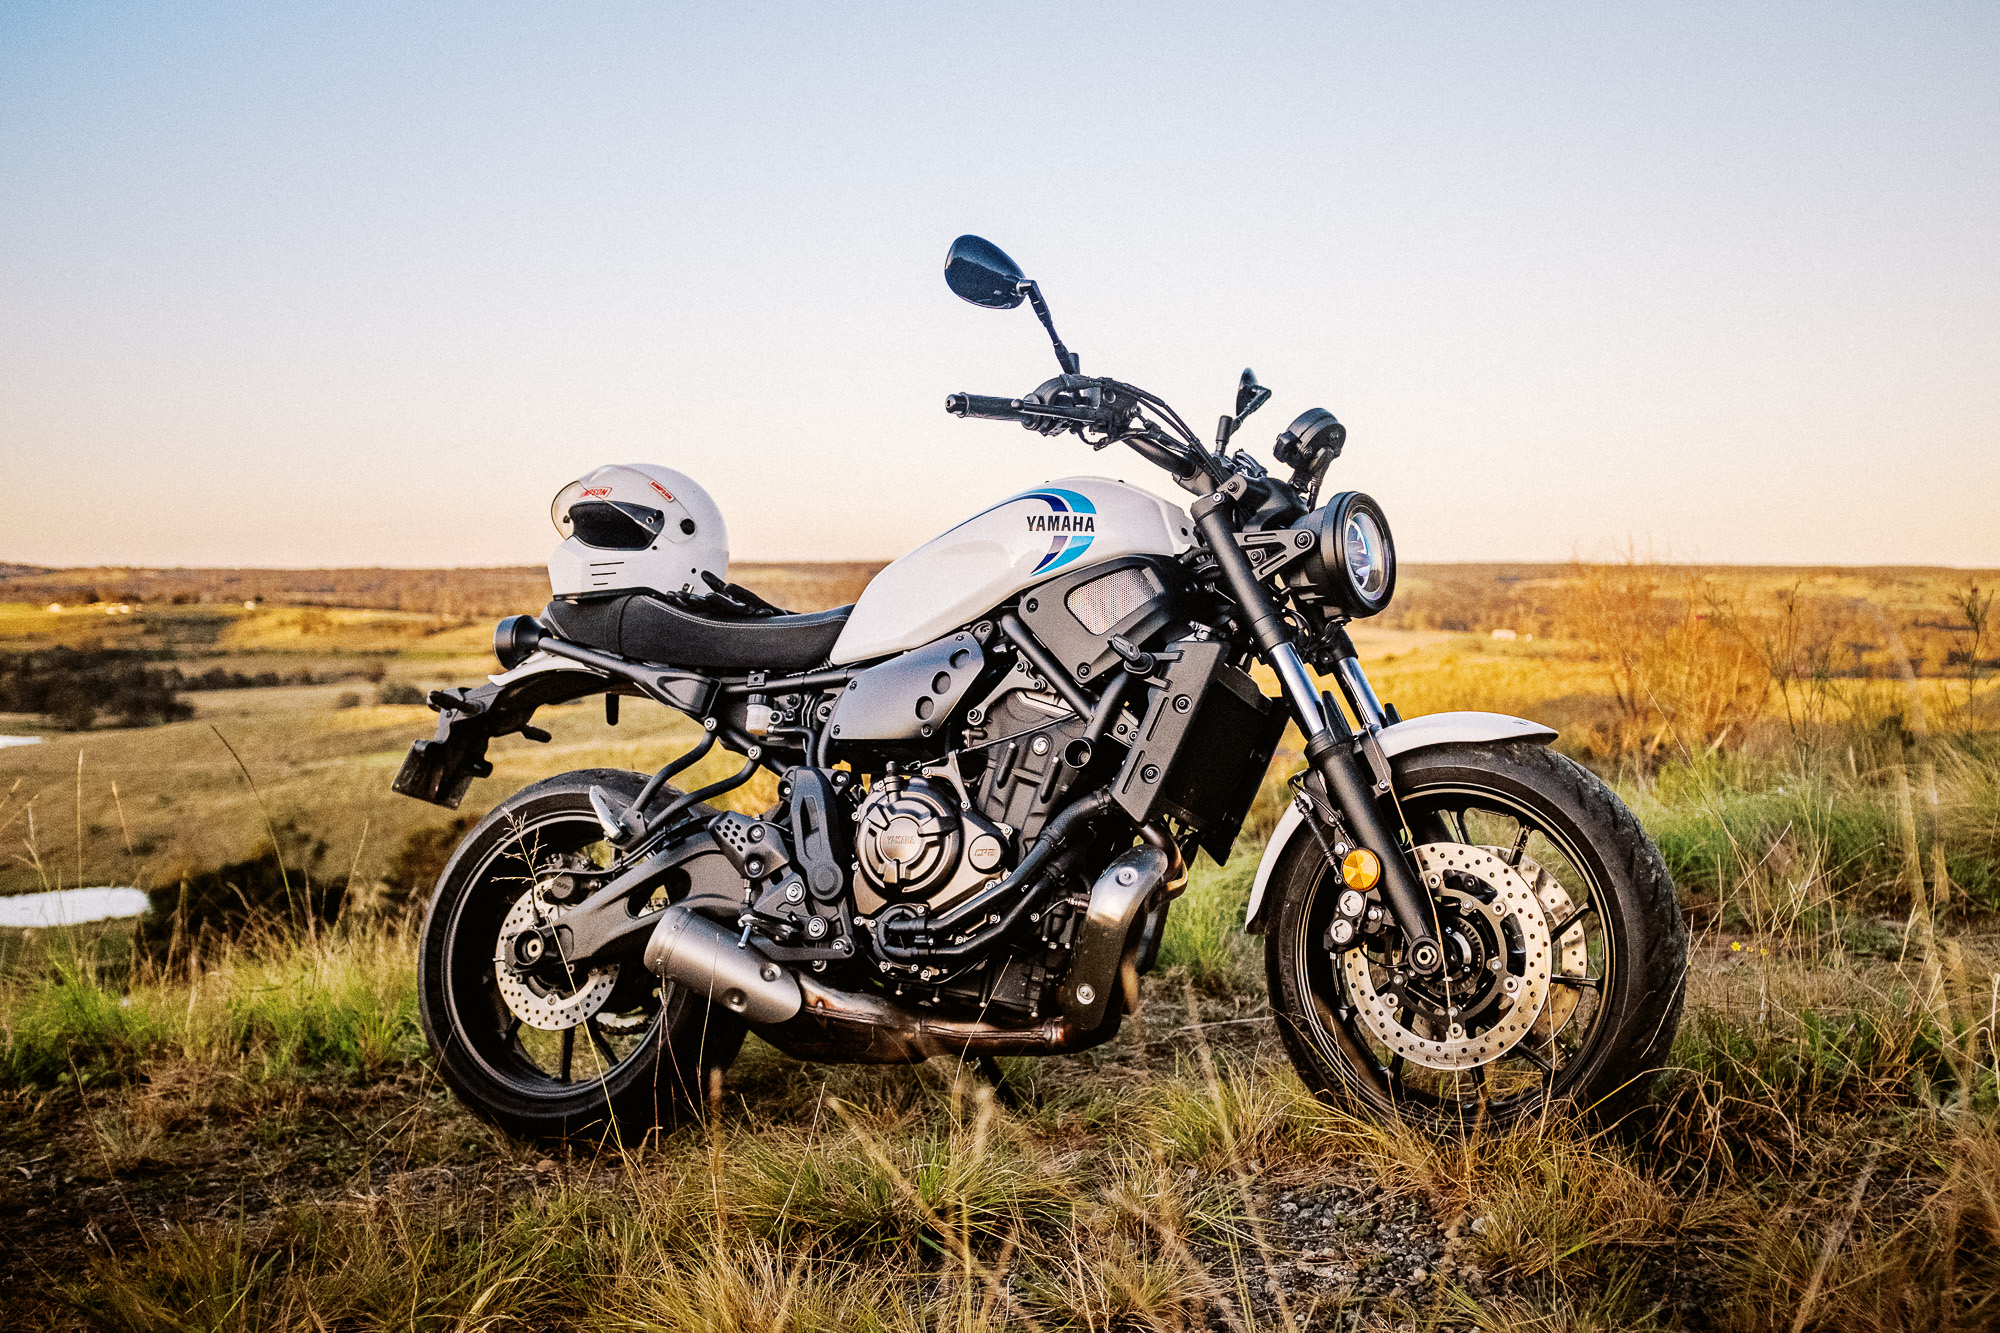 A 2020 Yamaha XSR700 motorcycle stands alson on a hill in Sydney's rural outer suburbs